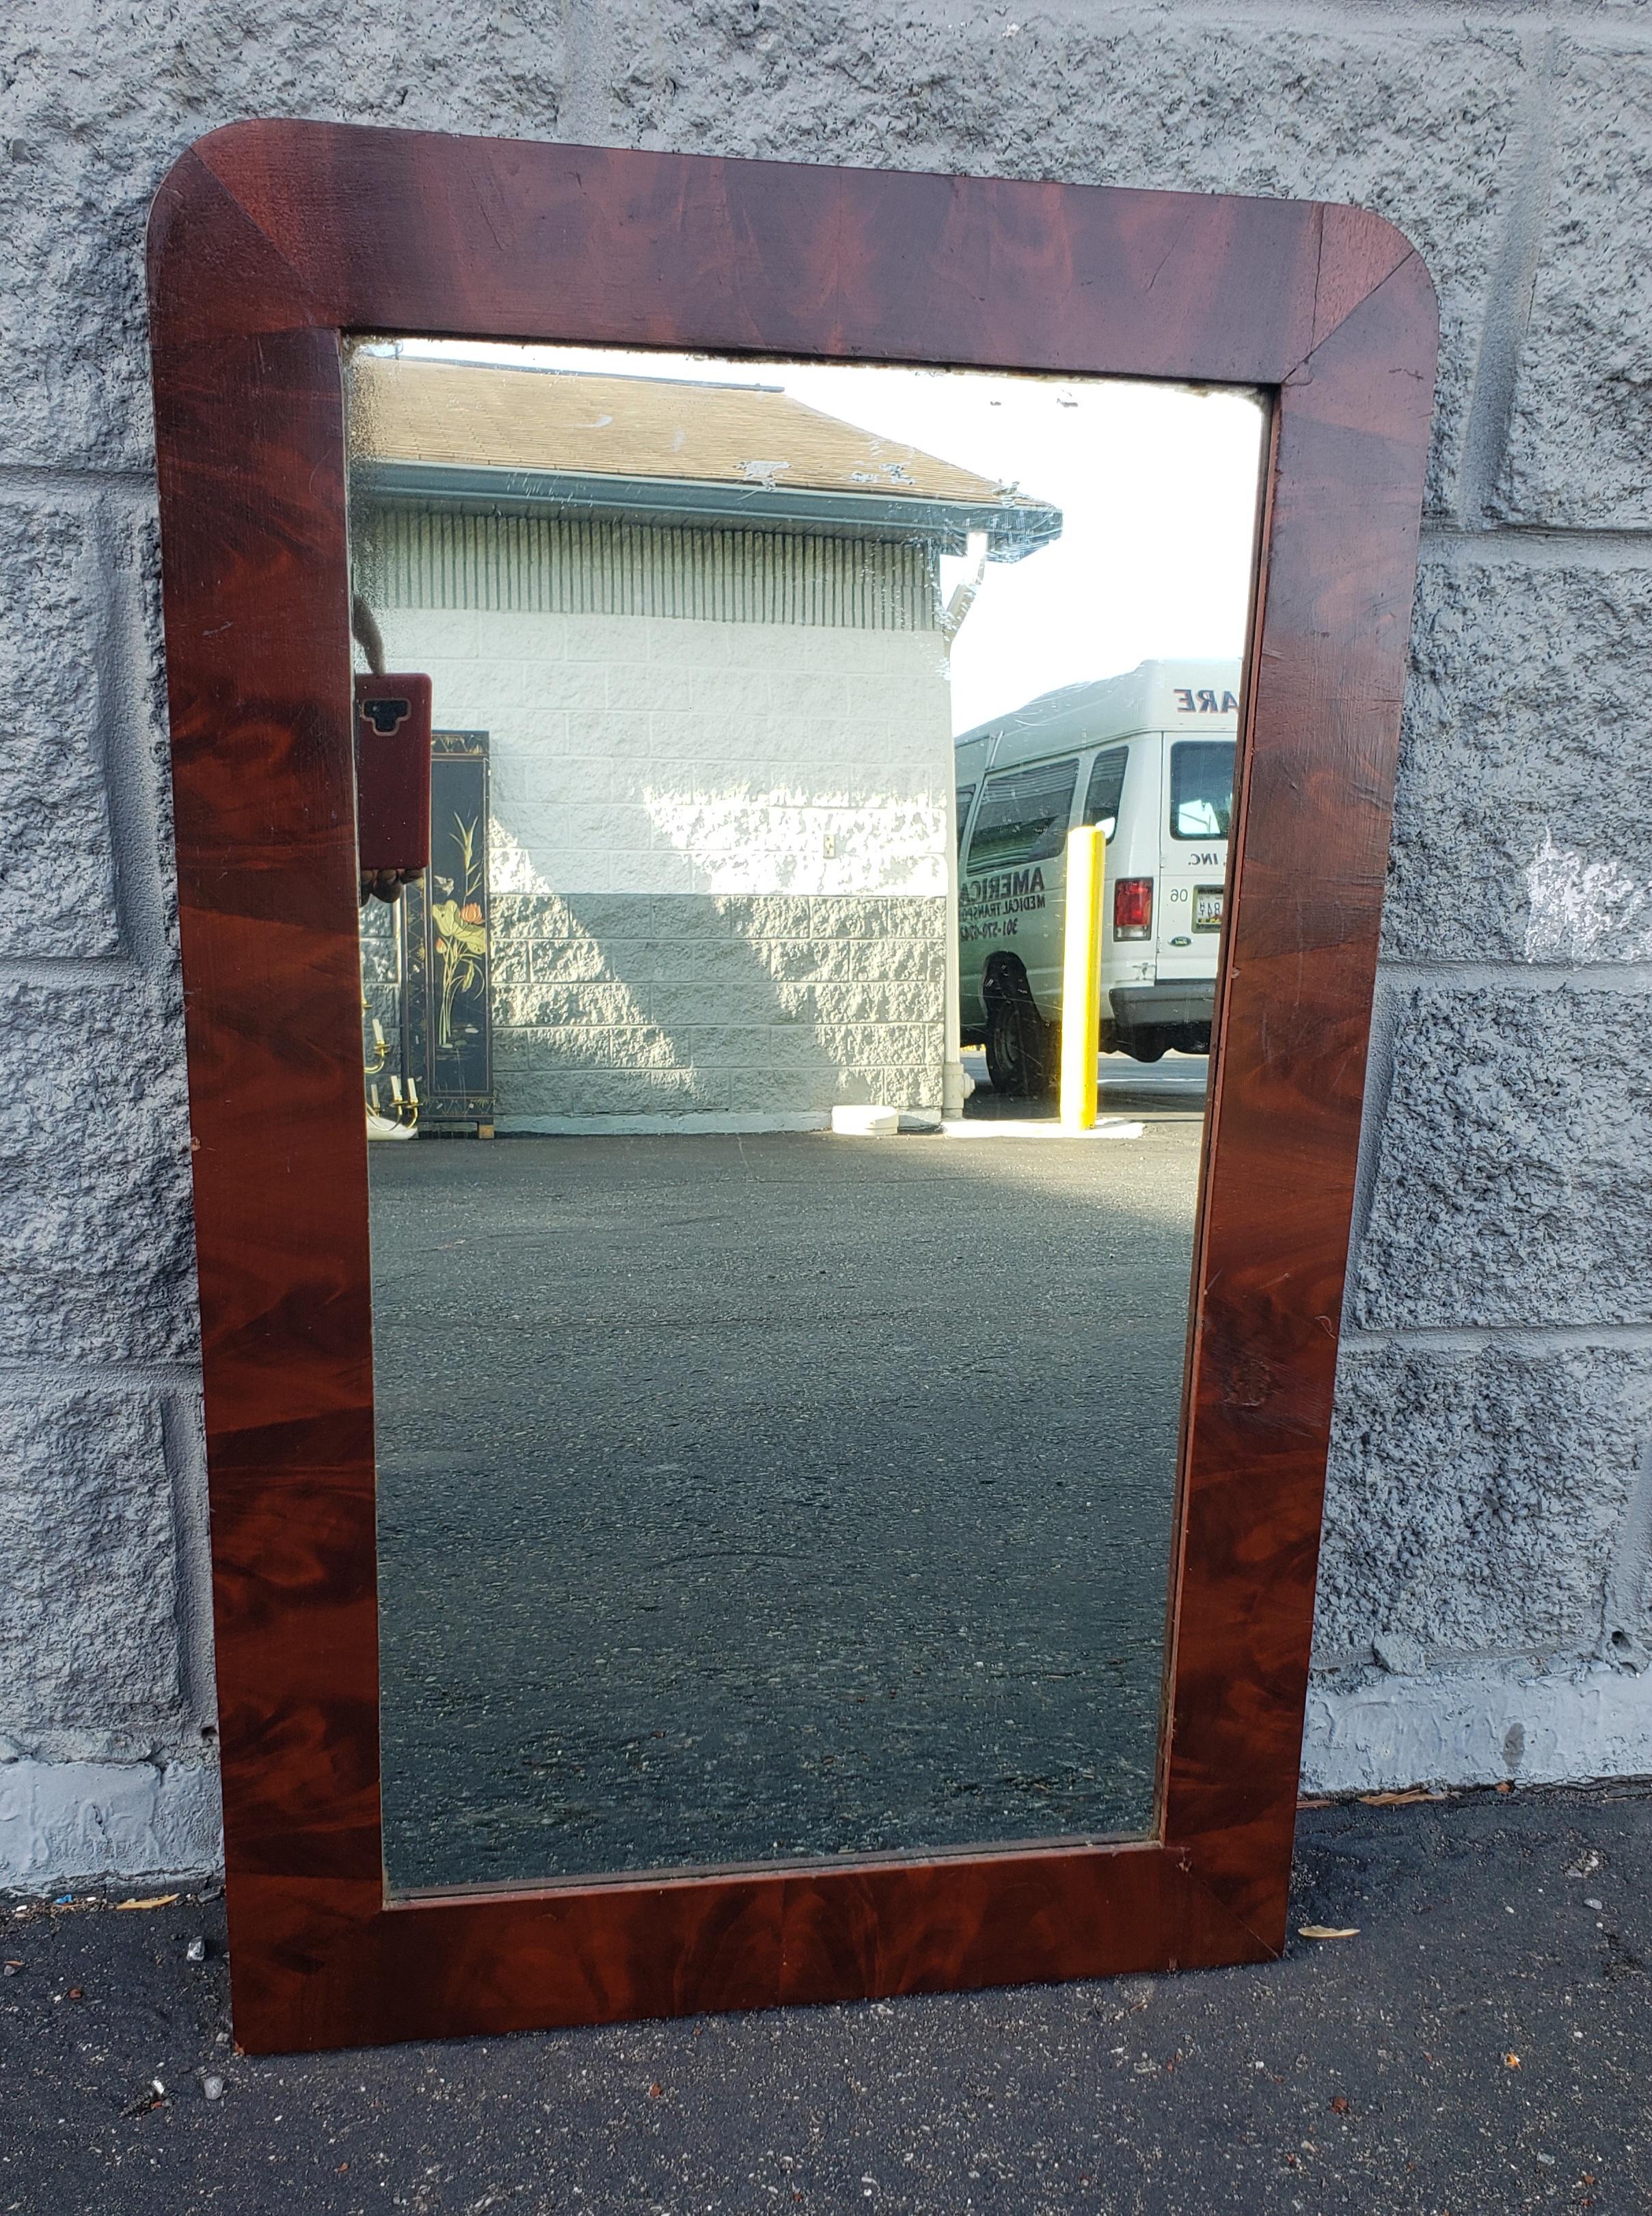 Antique flame mahogany frame wall mirror. Shows age on wood and on mirror,, but in good co dition. Measures 21.25 in width x 33.5